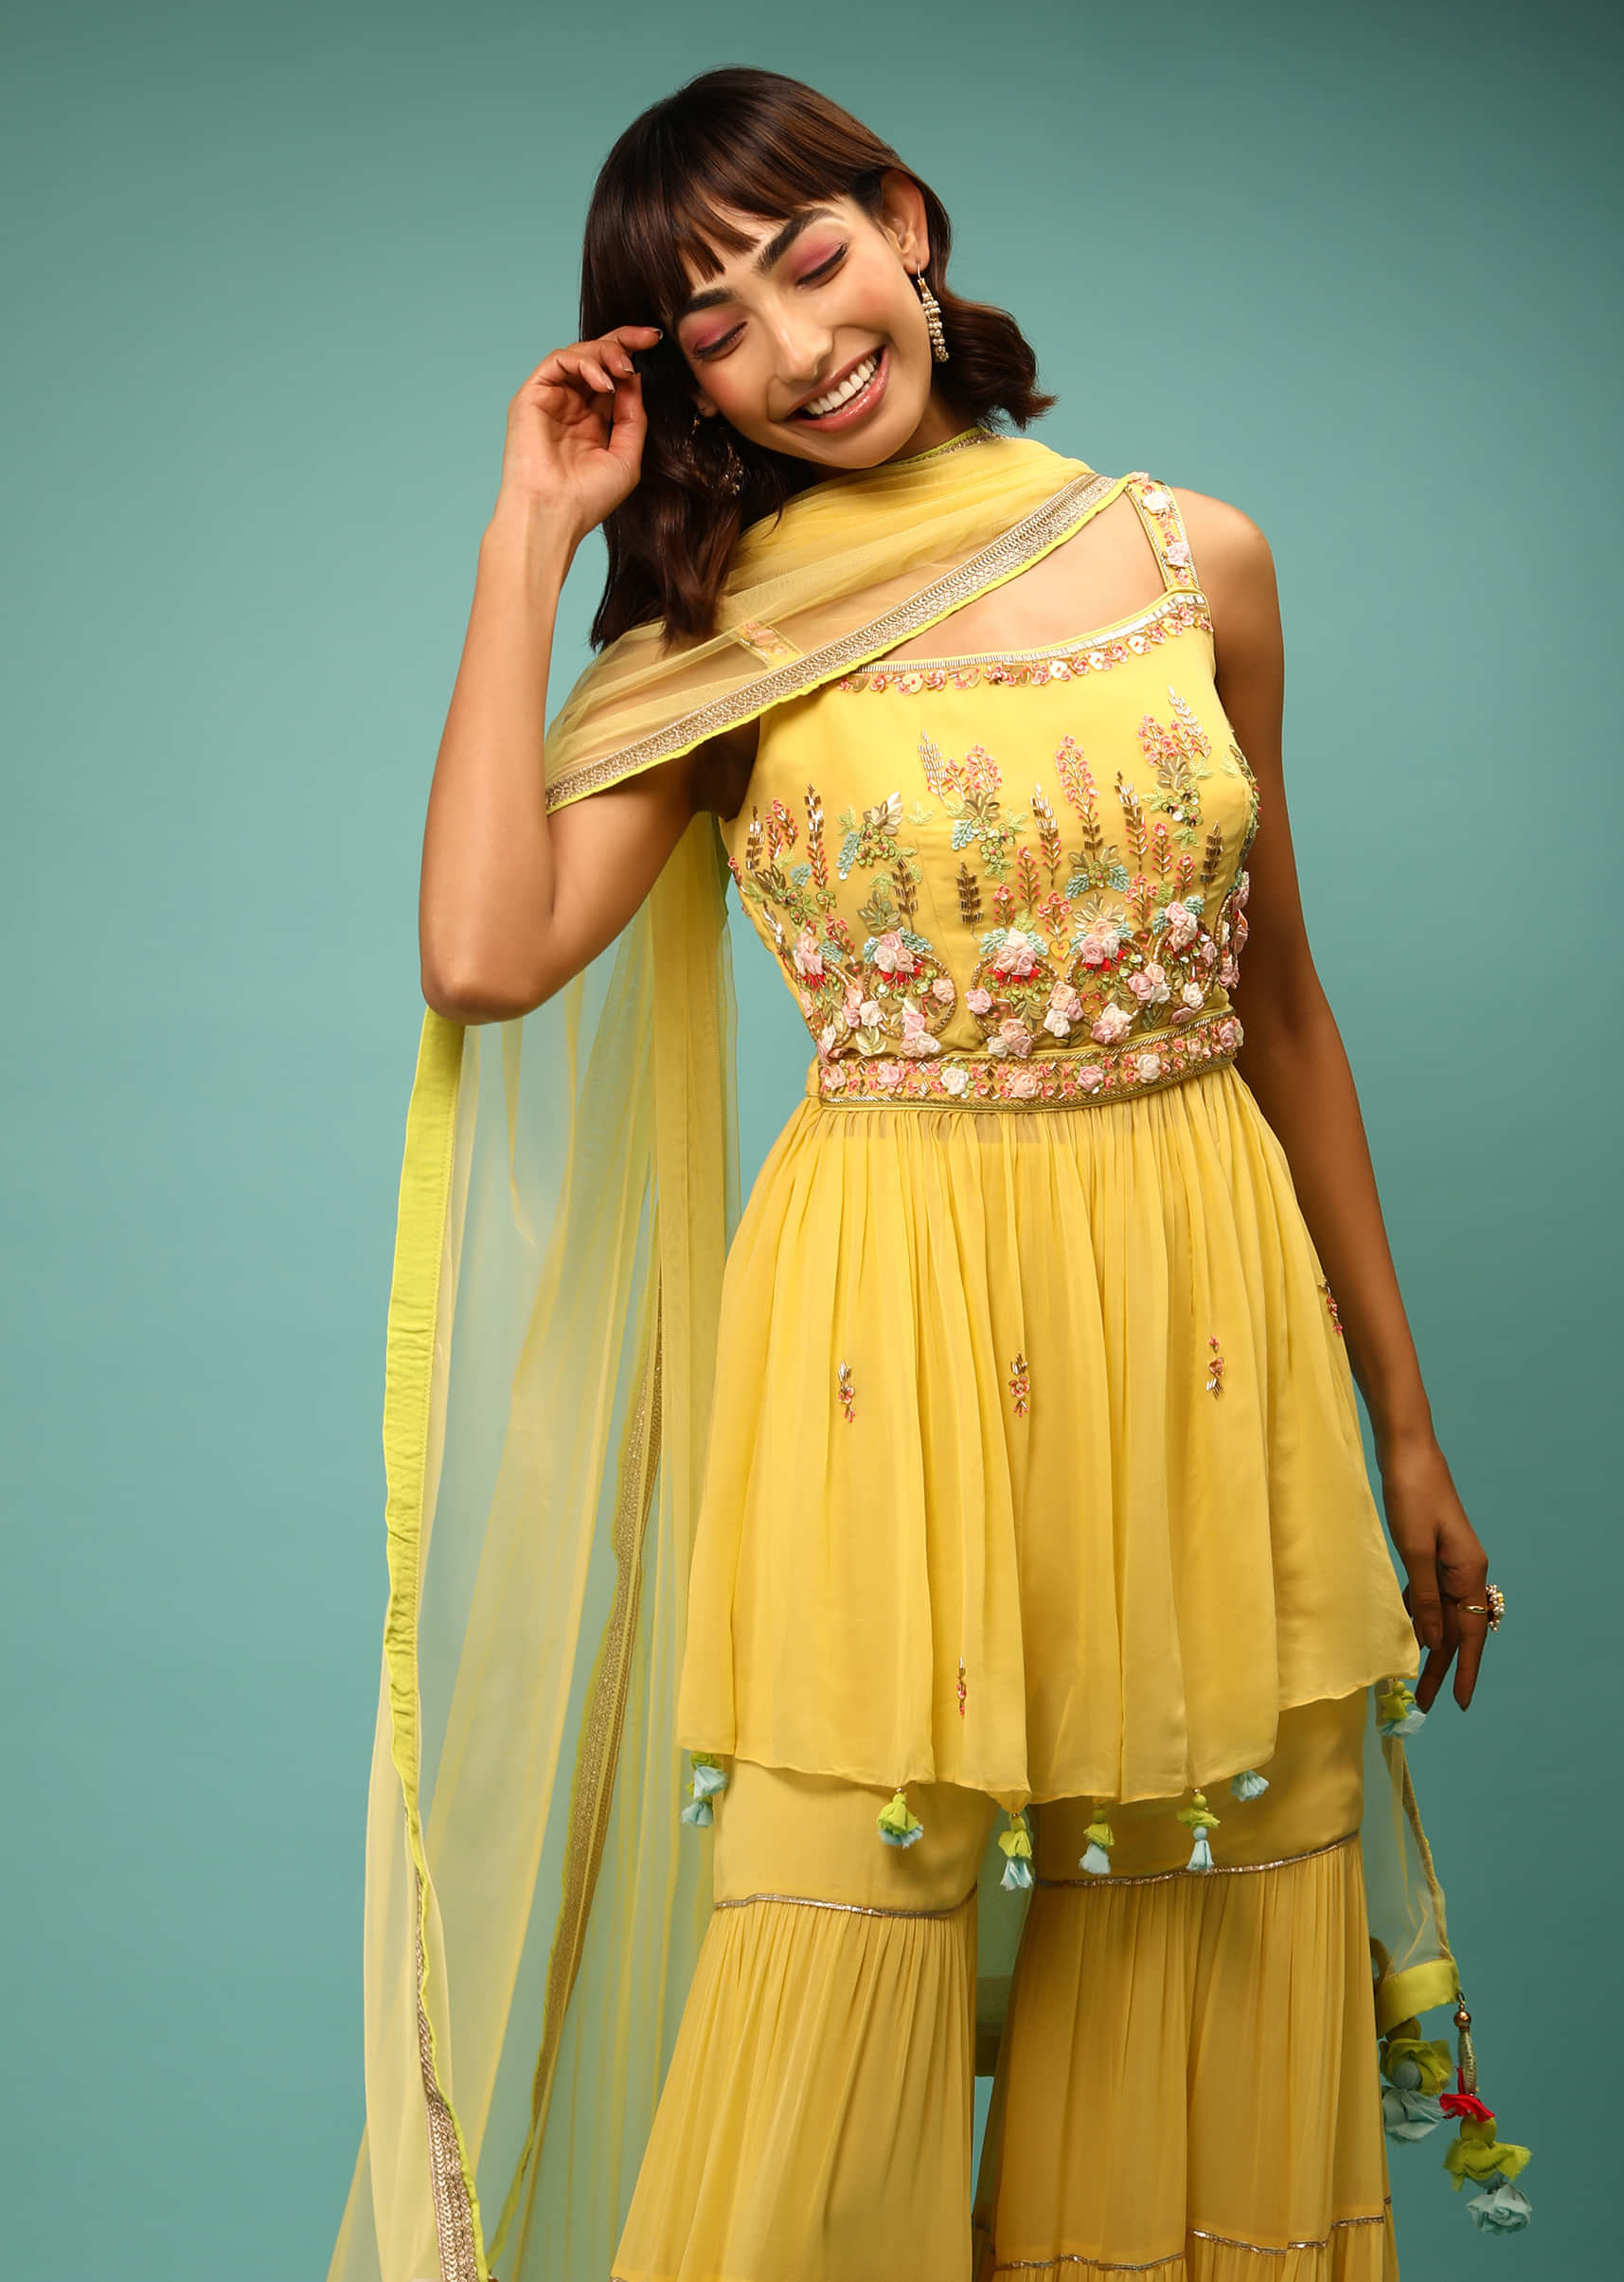 Daffodil Yellow Sharara And Peplum Suit With 3D Satin Flowers And Multi Colored Bead Work In Floral Motifs 